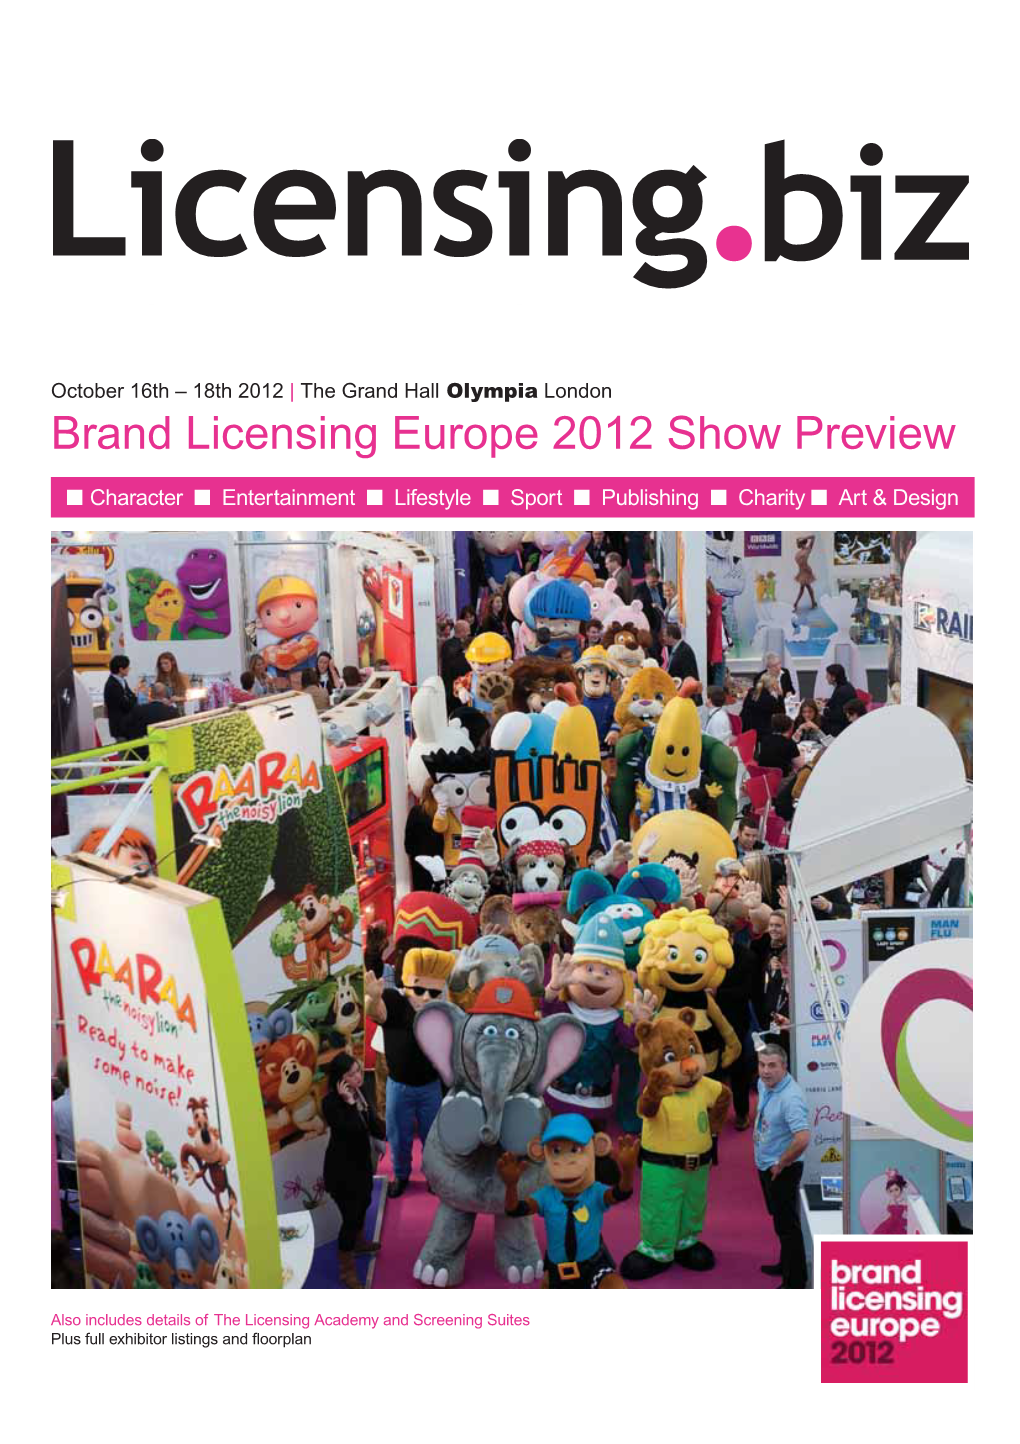 01 Brand Licensing 2012 - Cover Final 27/09/2012 17:08 Page 1